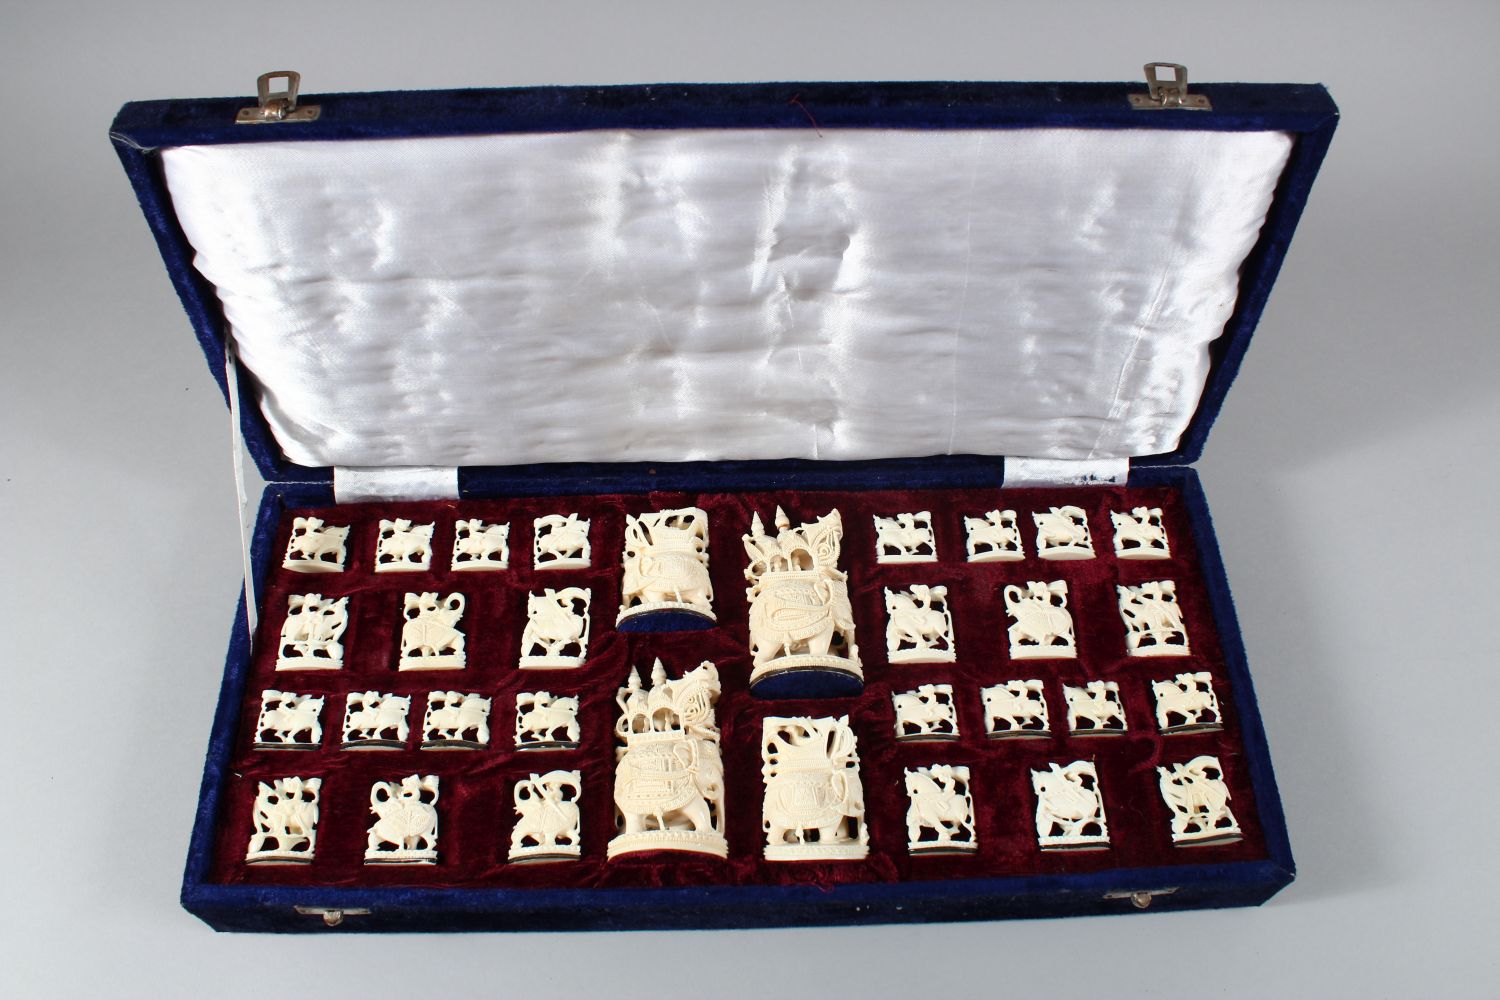 A GOOD 19TH / 20TH CENTURY INDIAN CARVED IVORY CHESS SET IN ORIGINAL BOX, from 10cm high down to 2.